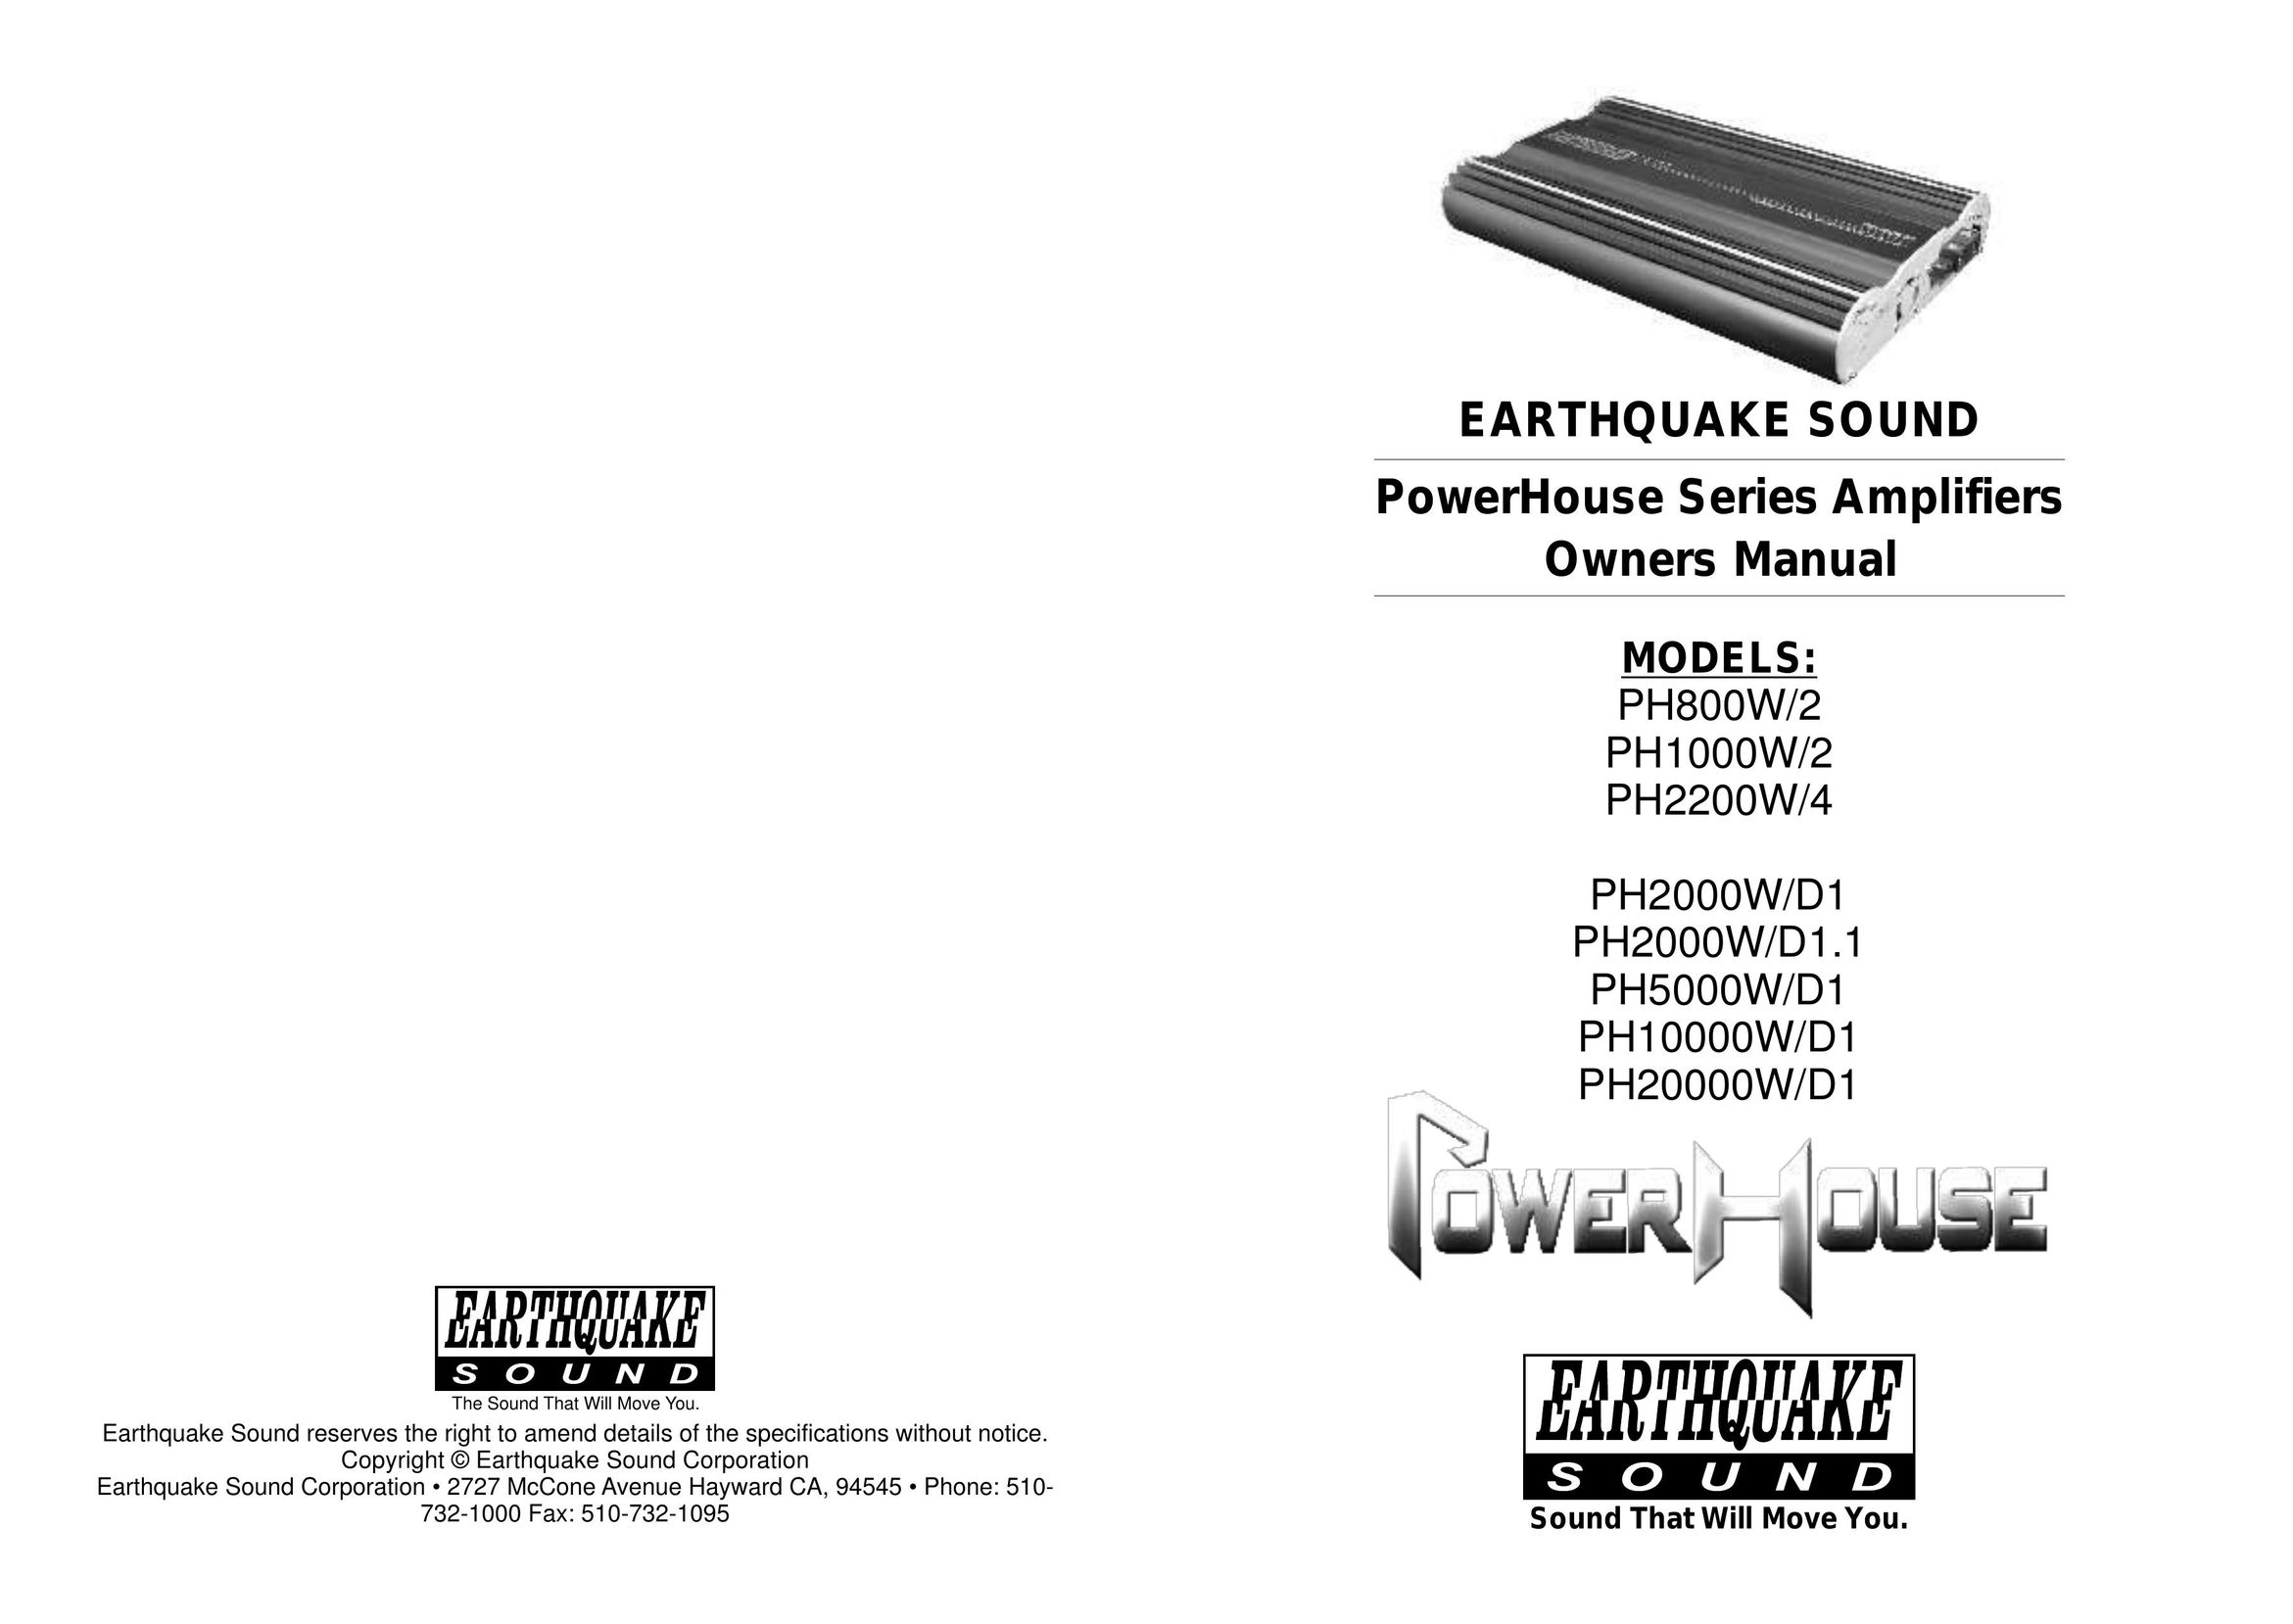 Earthquake Sound PH800W/2 Stereo Amplifier User Manual